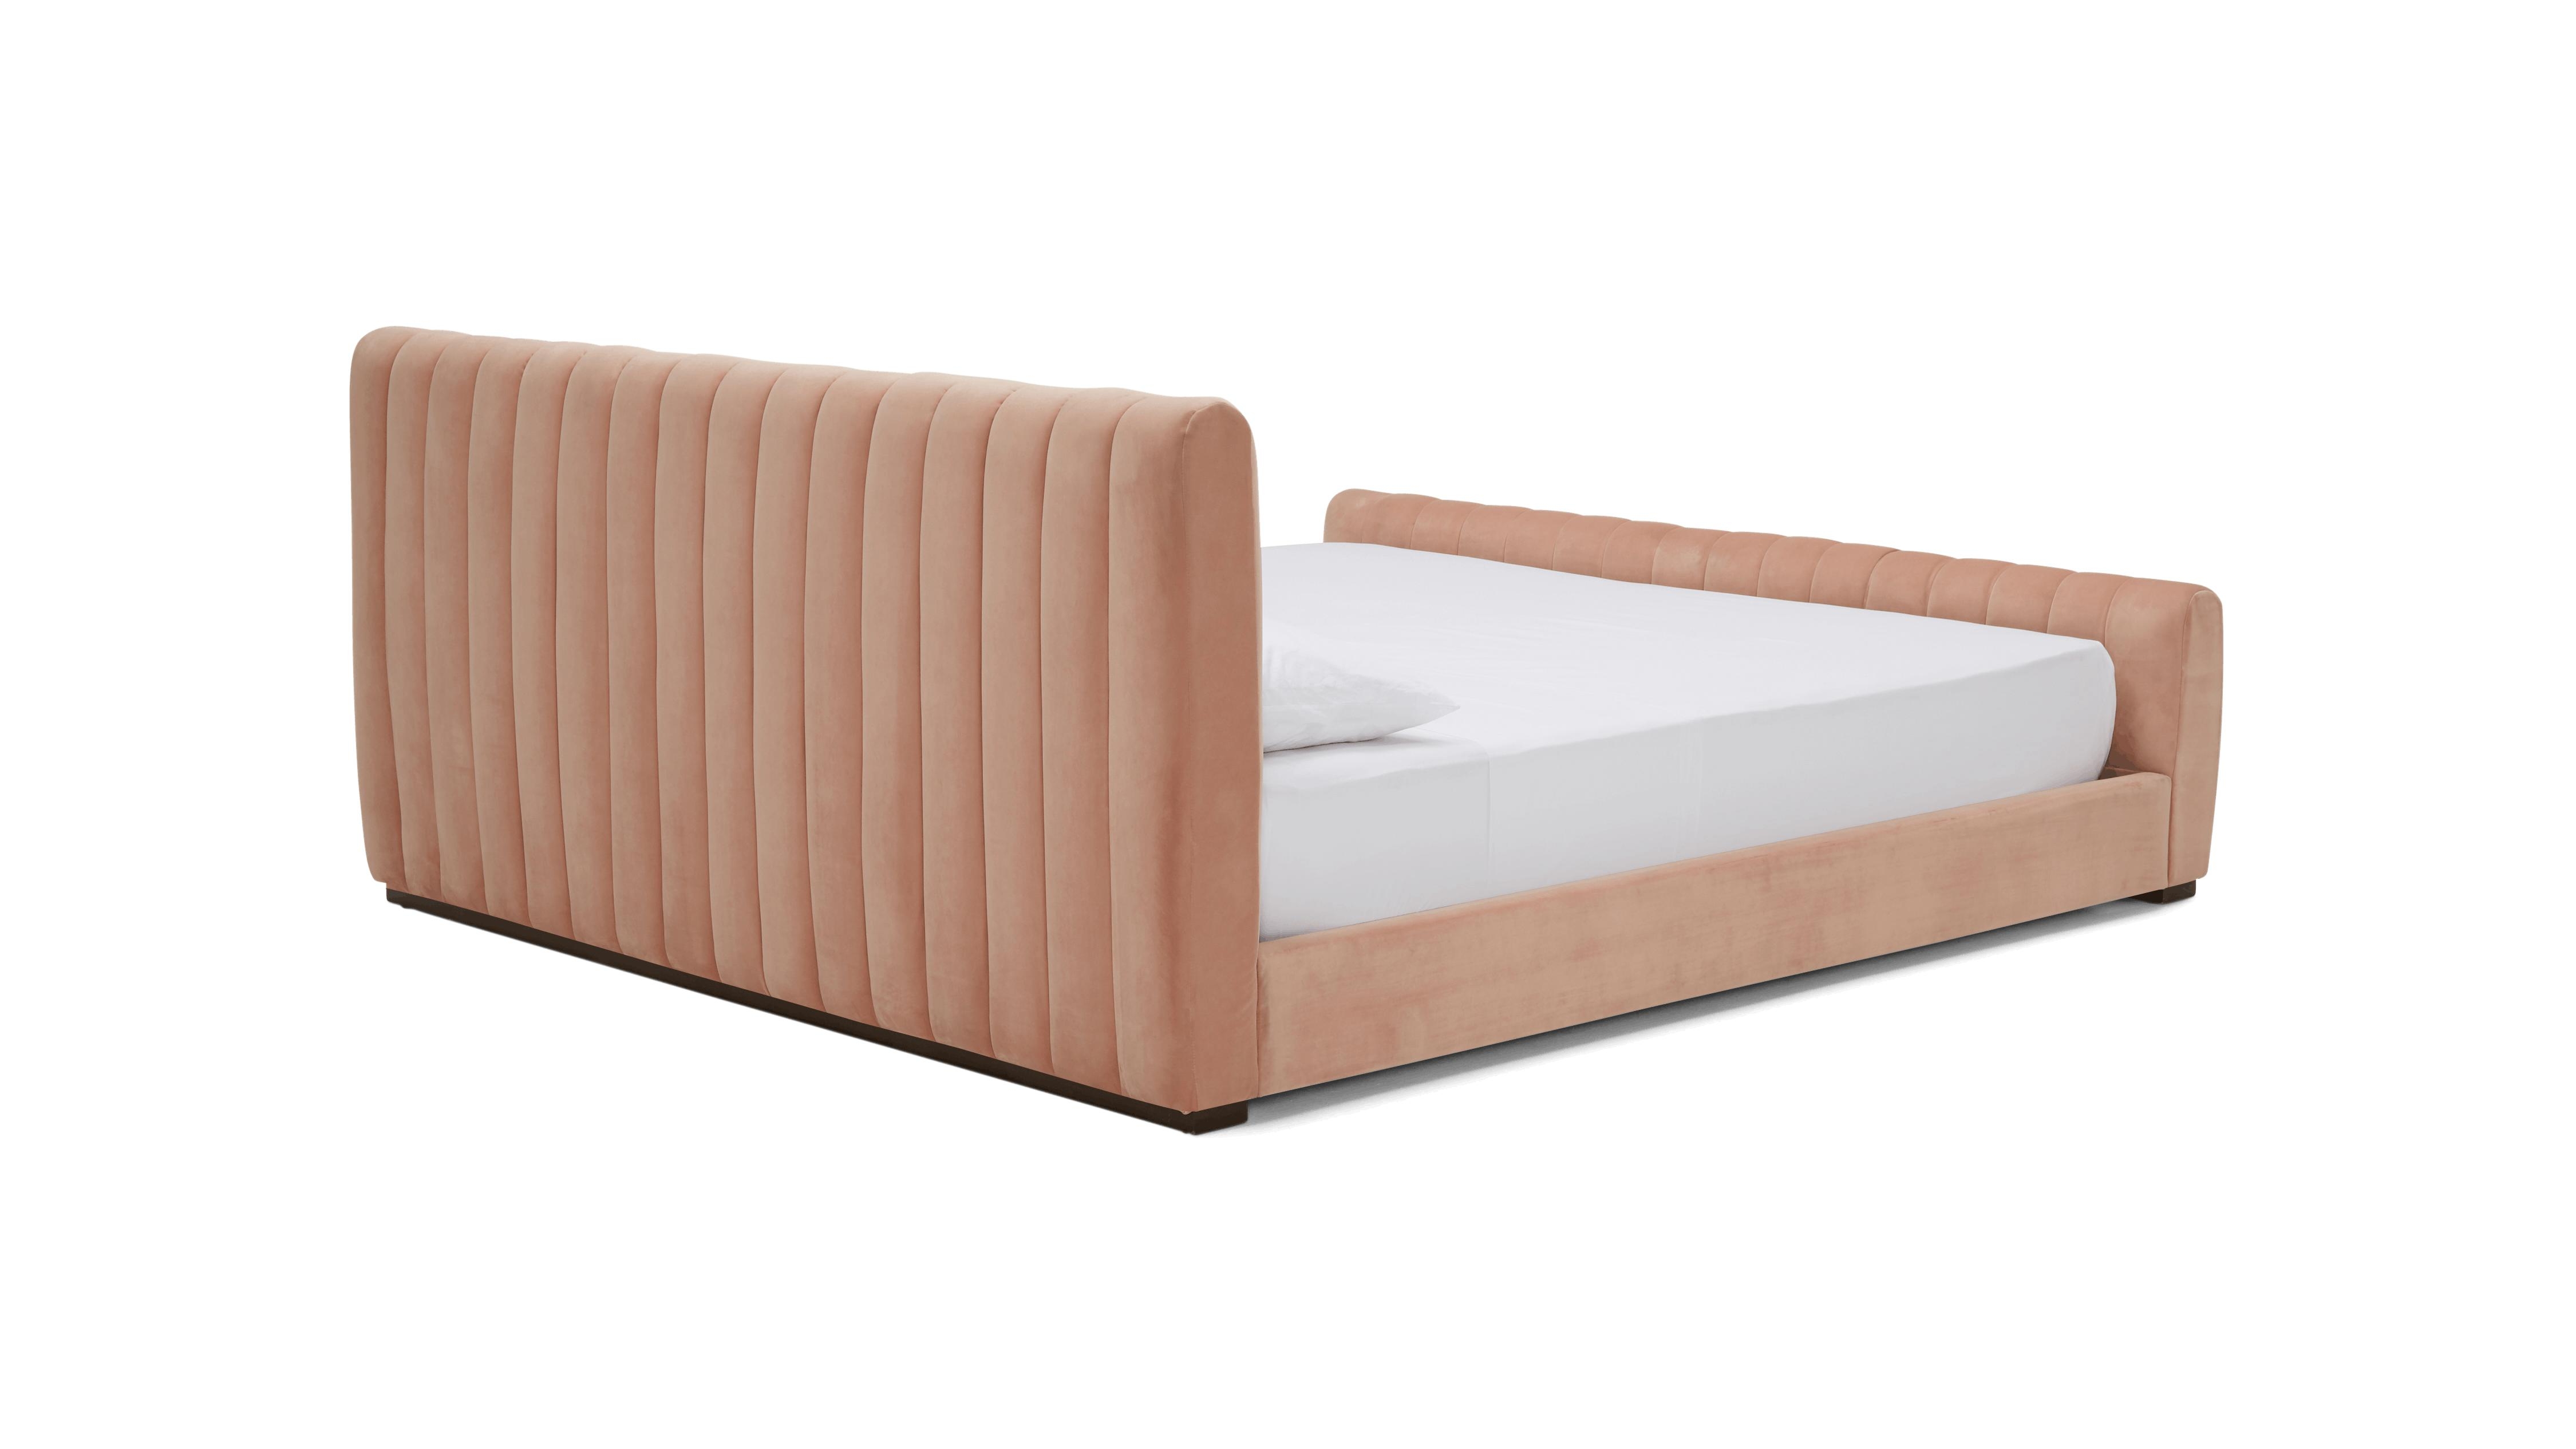 Pink Camille Mid Century Modern Bed - Royale Blush - Mocha - Queen - Image 3